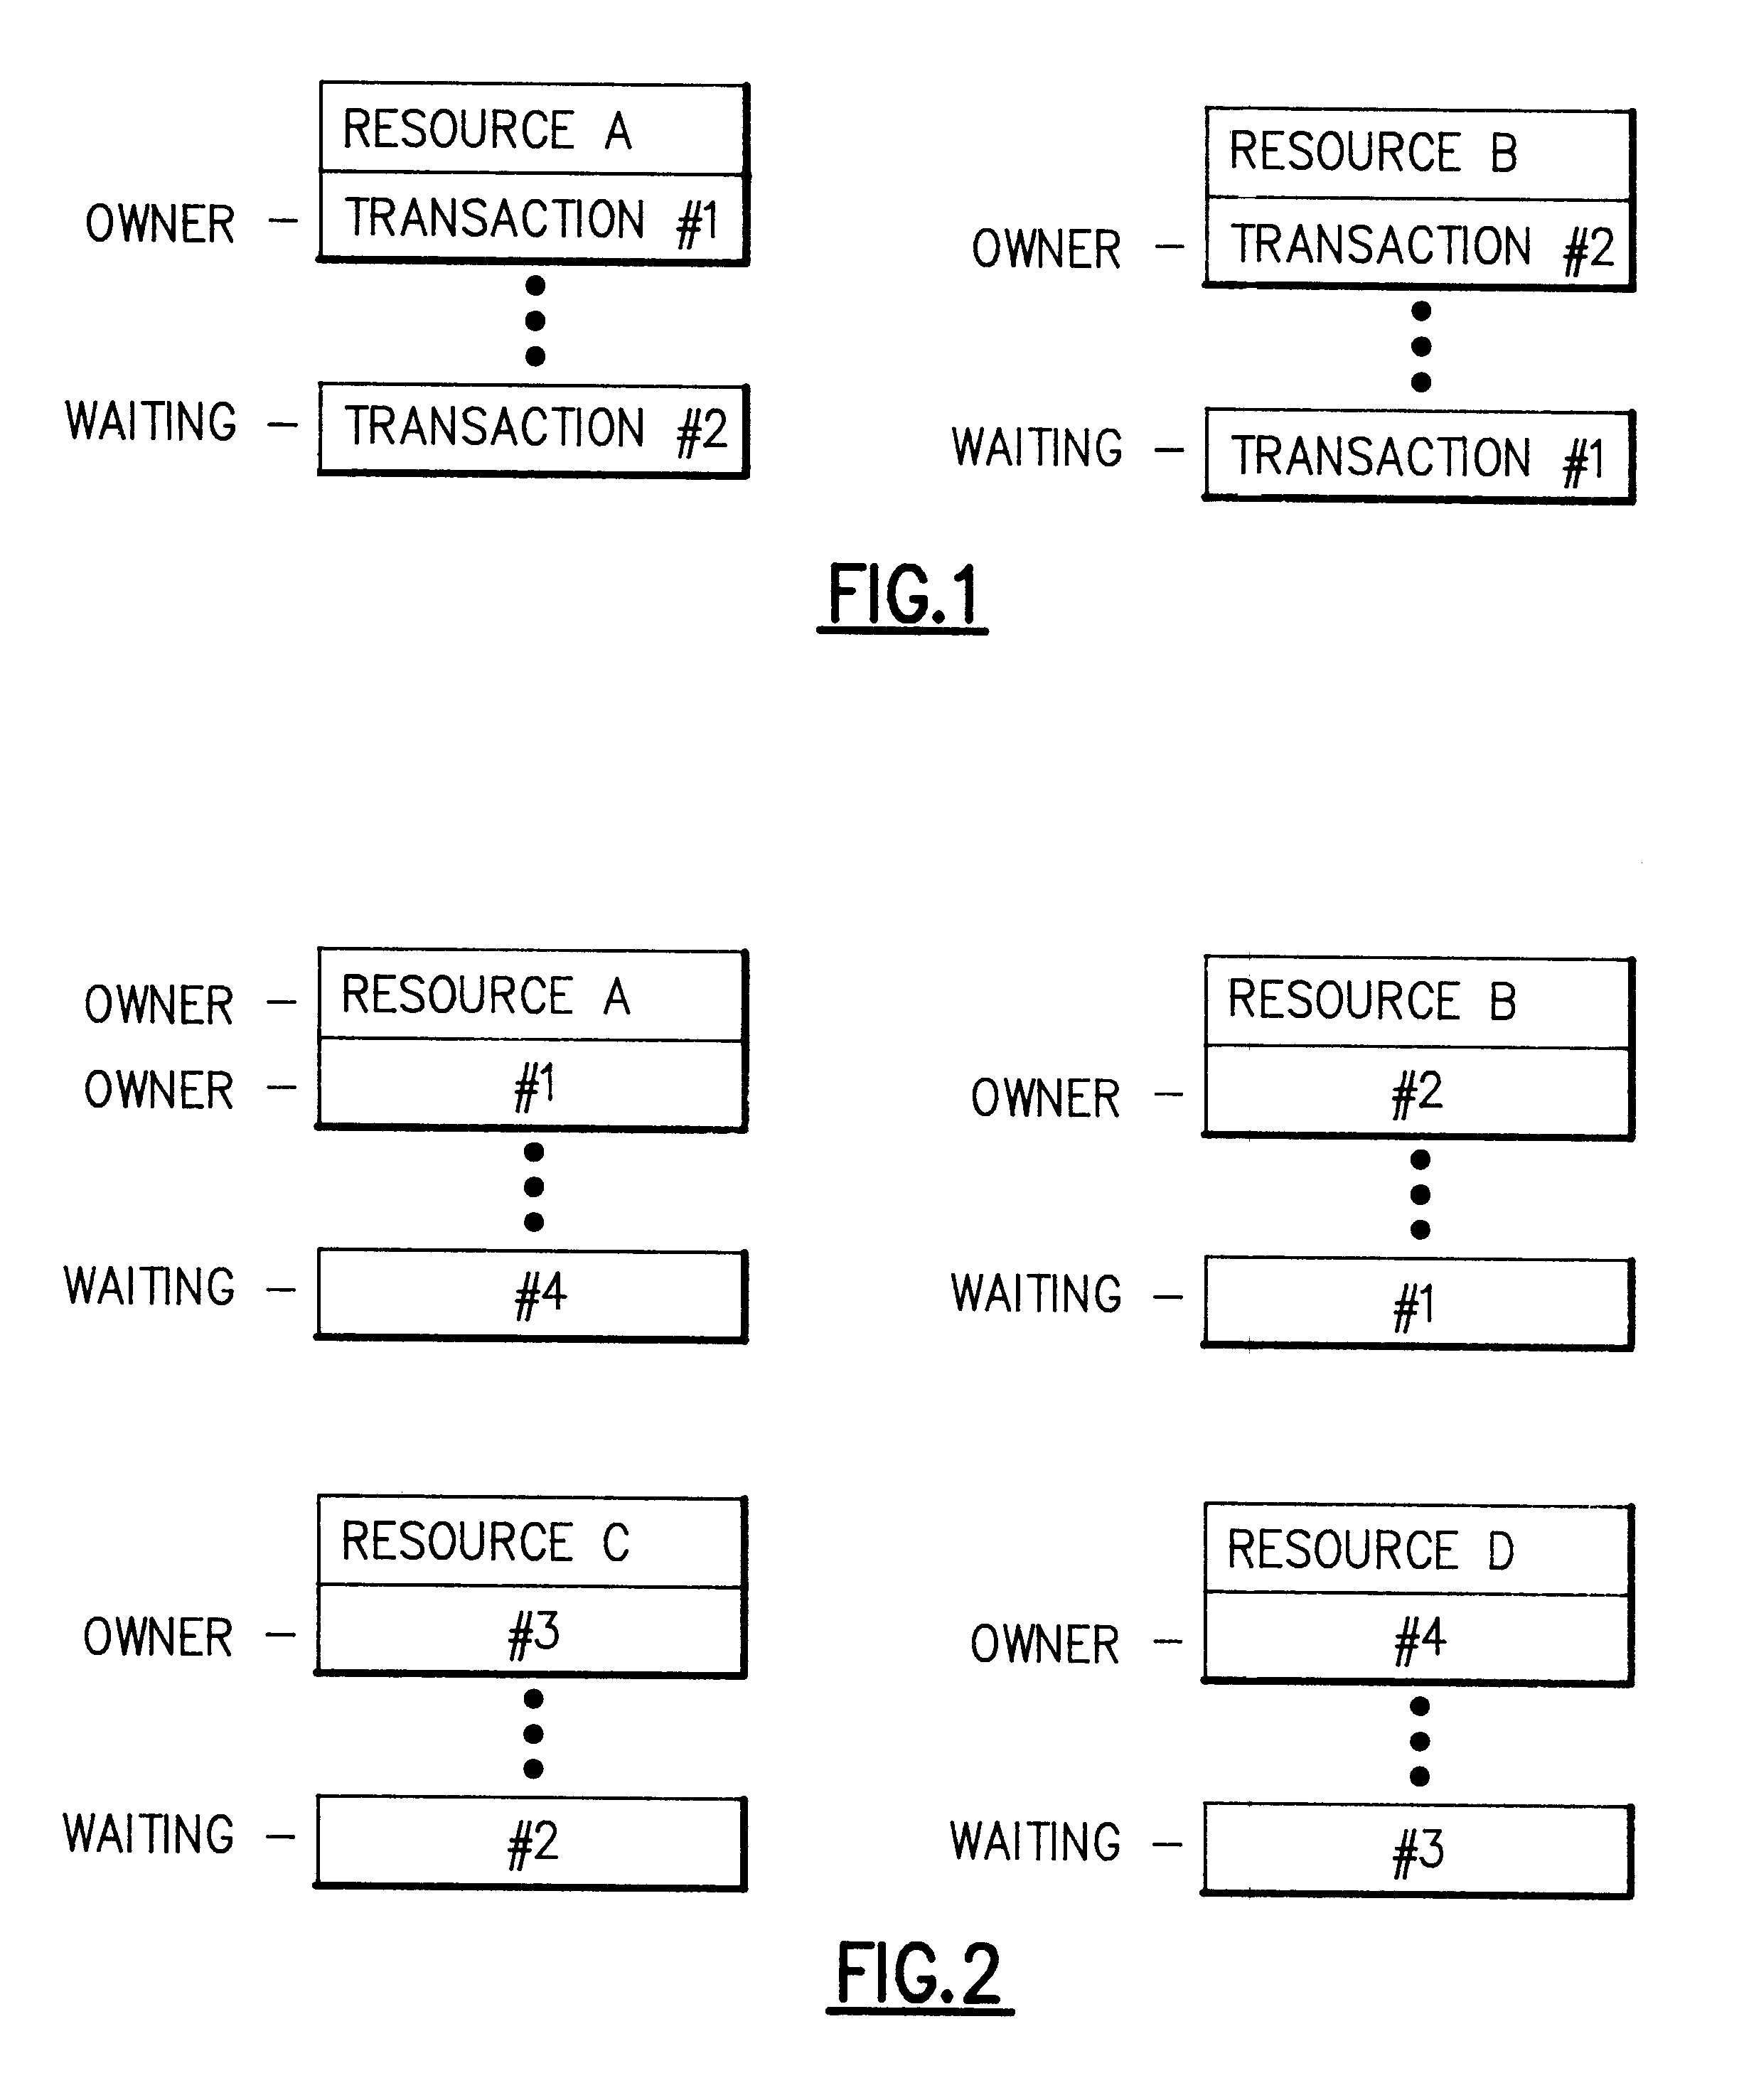 System and method for reducing research time through a lock wait matrix